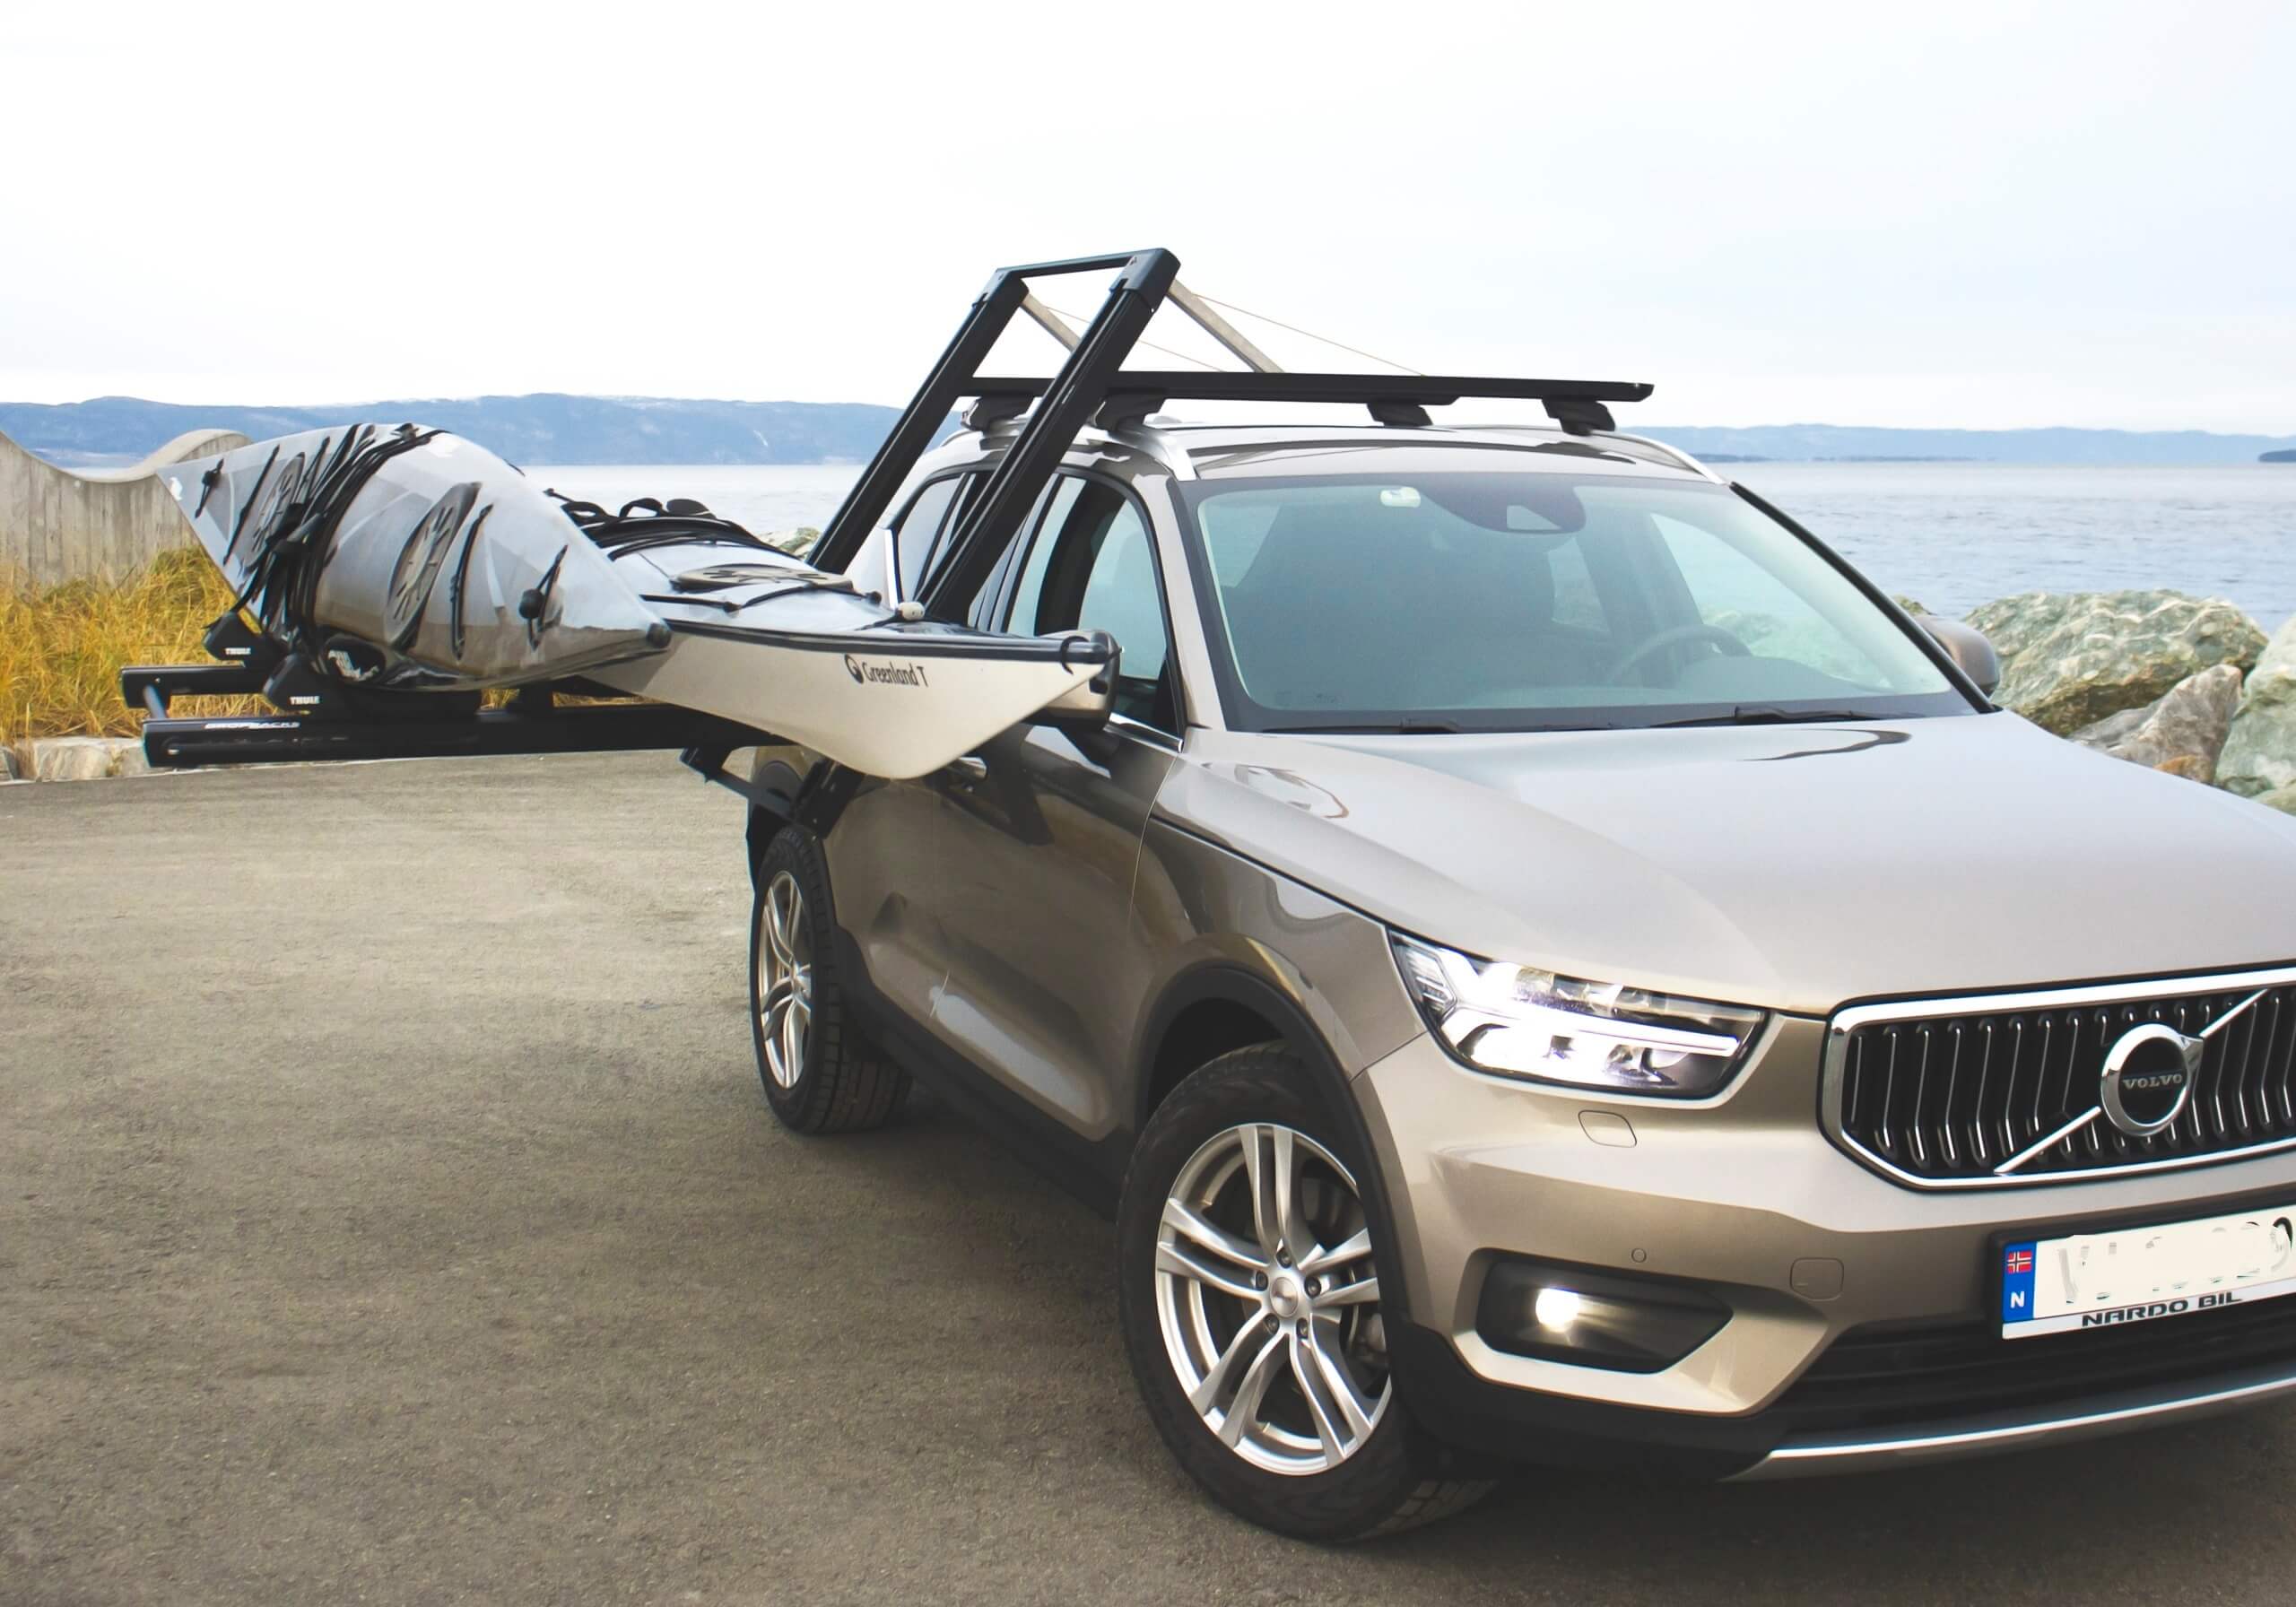 BMW X1 (2010 to 2015):Dropracks Sport roof loading system (vehicle roof connectors at extra cost)